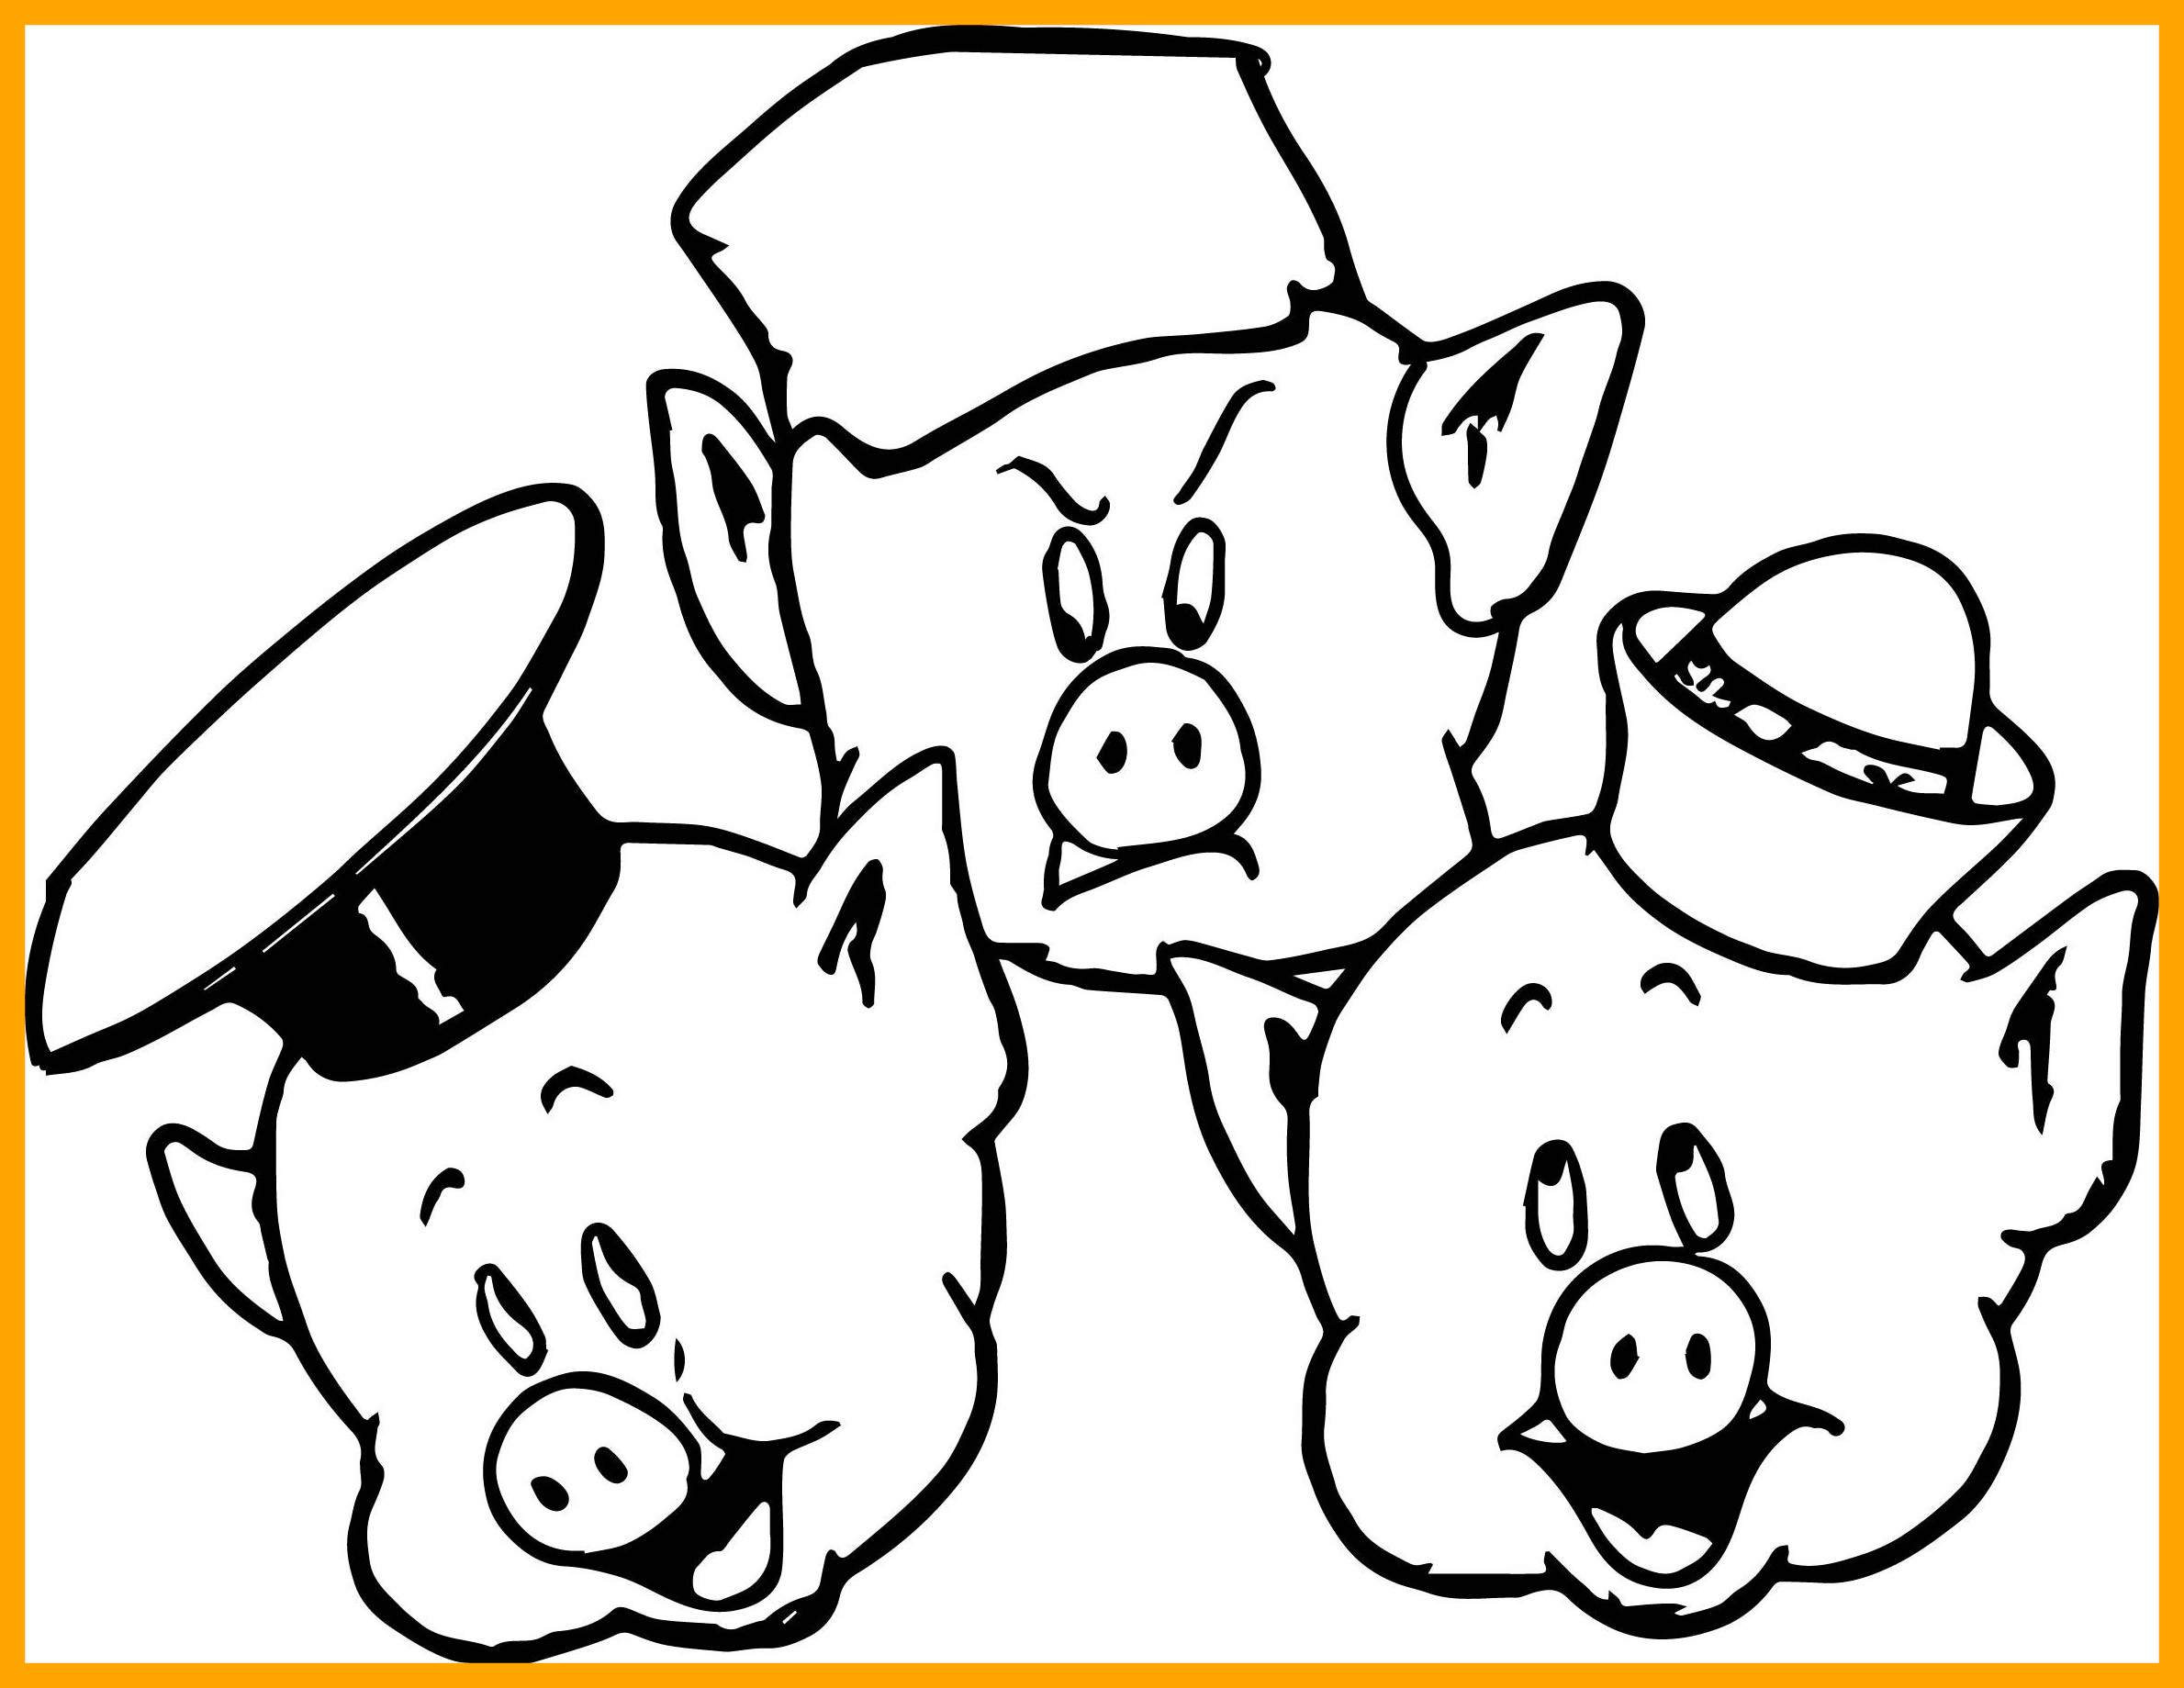 Cute Pig Coloring Pages at GetColorings.com   Free ...